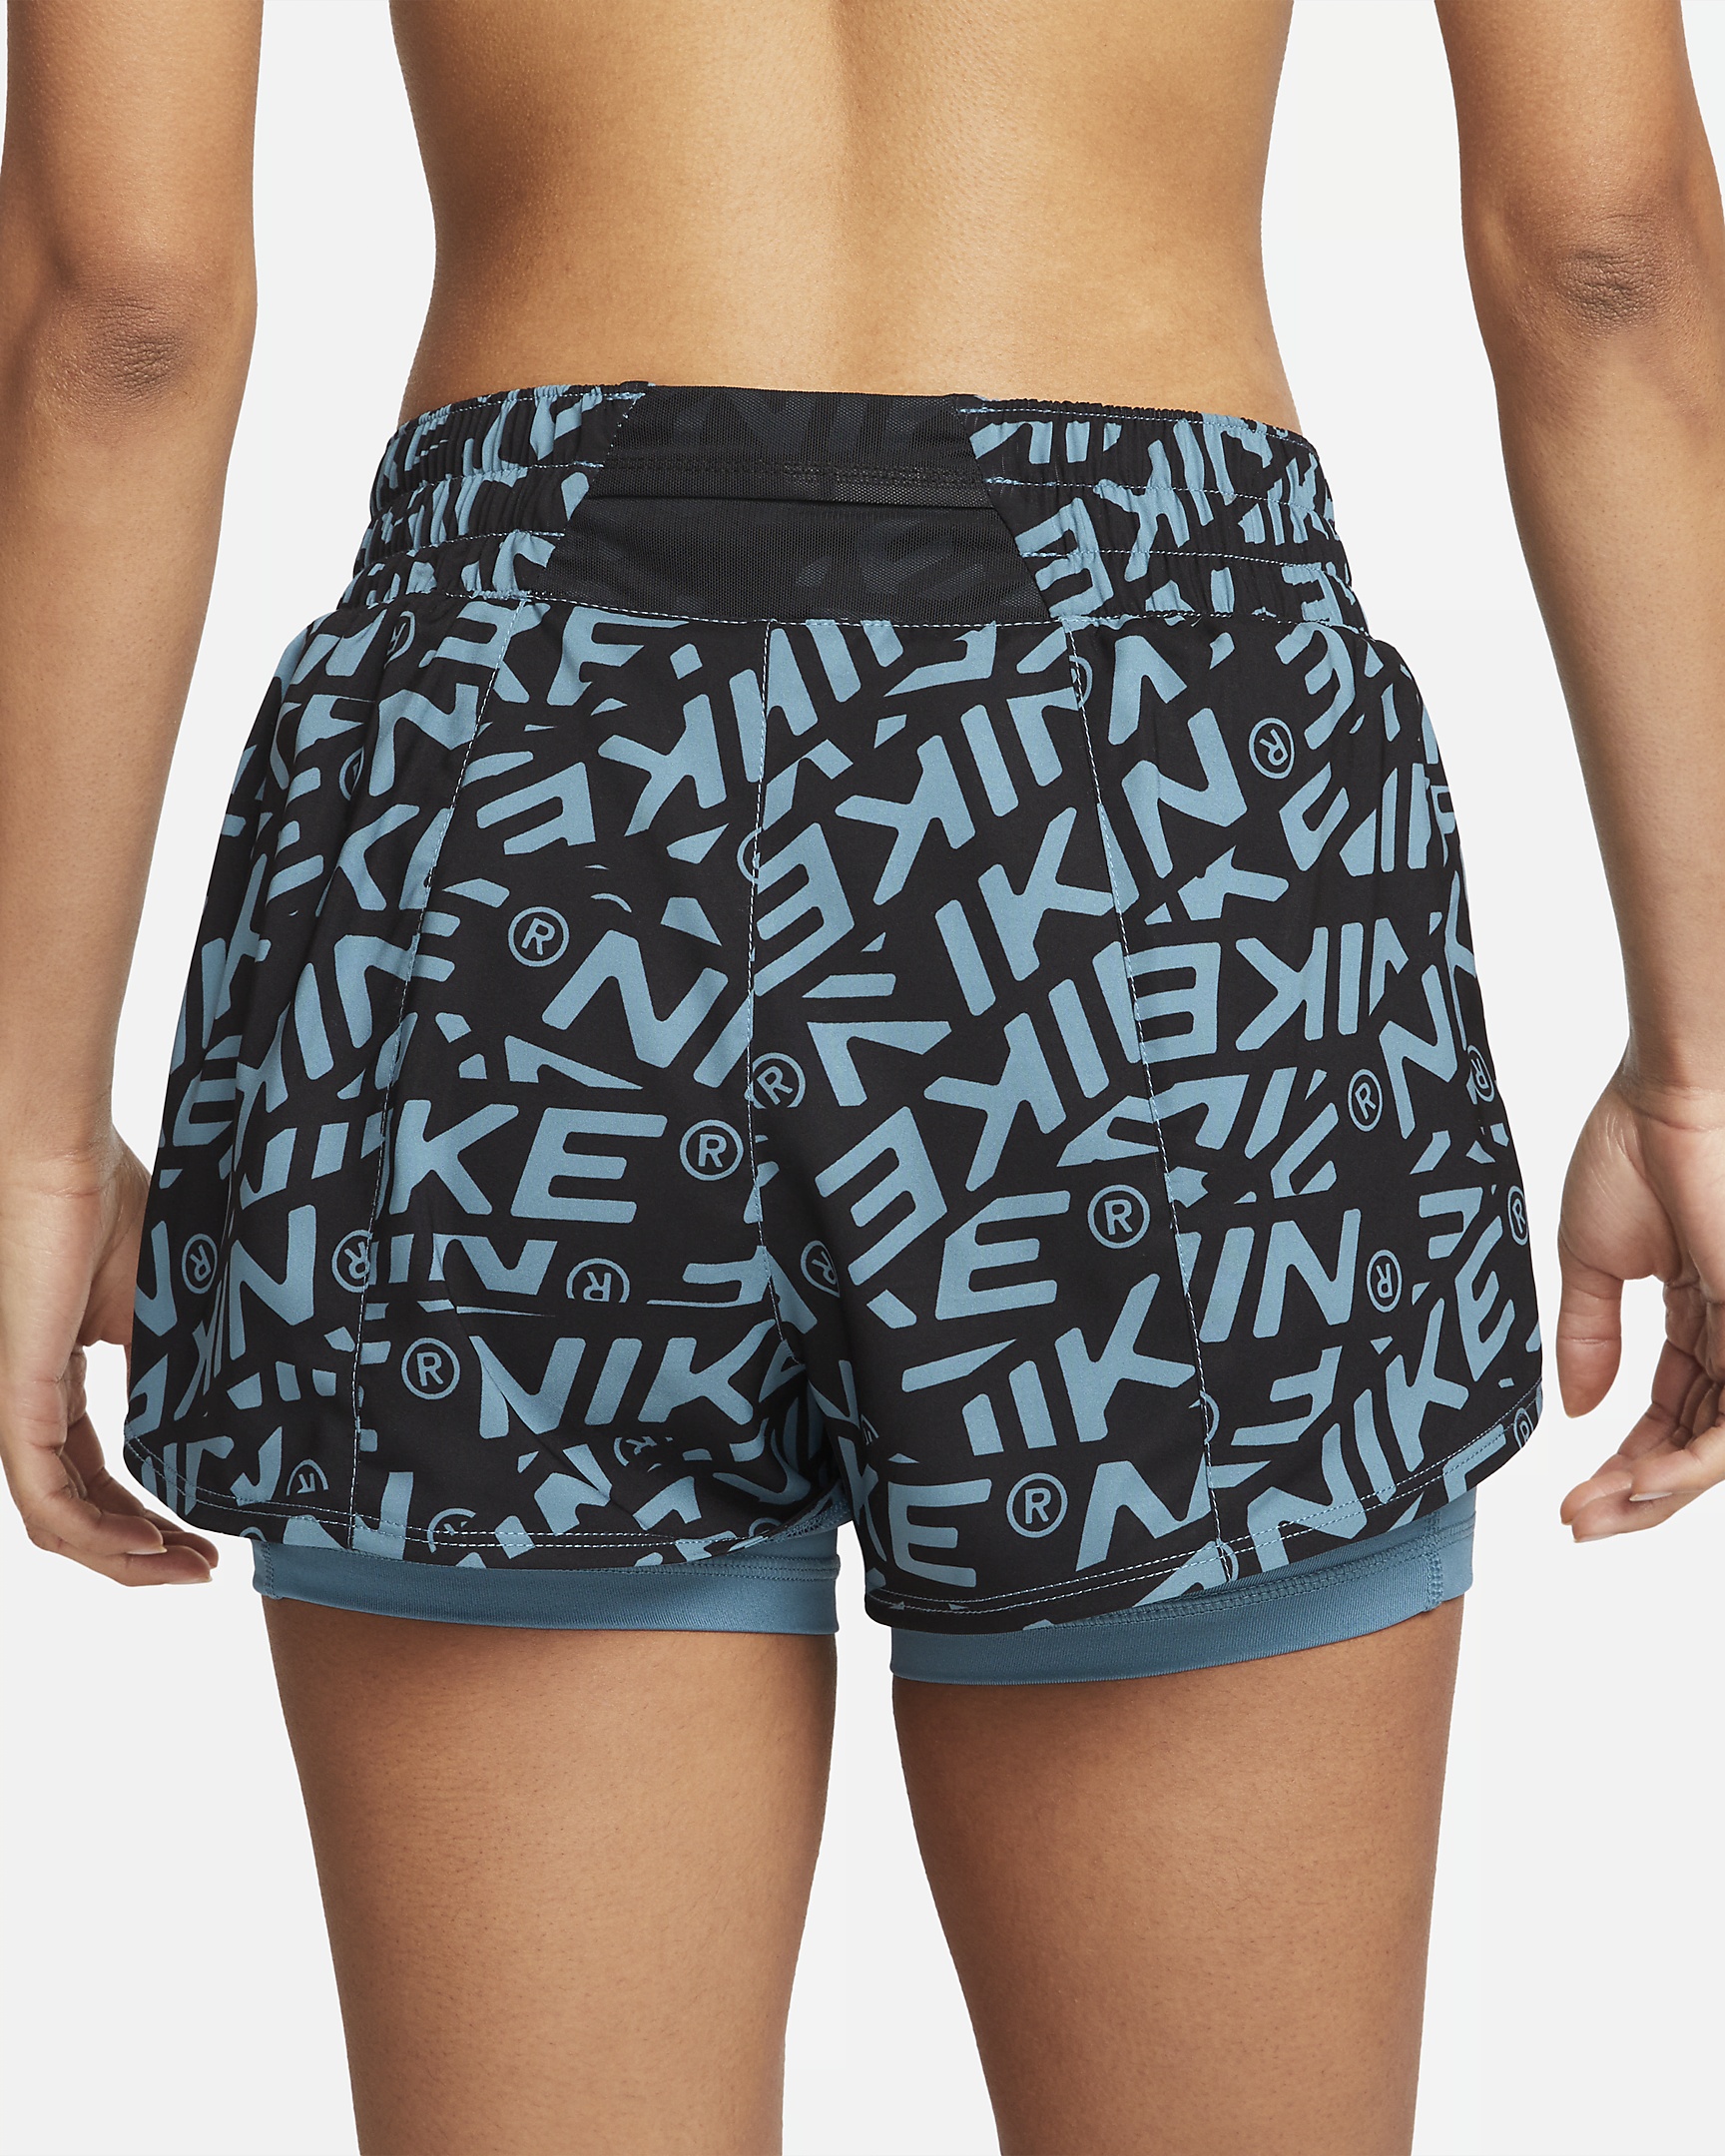 Nike Women's Dri-FIT One Mid-Rise 3" 2-in-1 Printed Shorts - 3